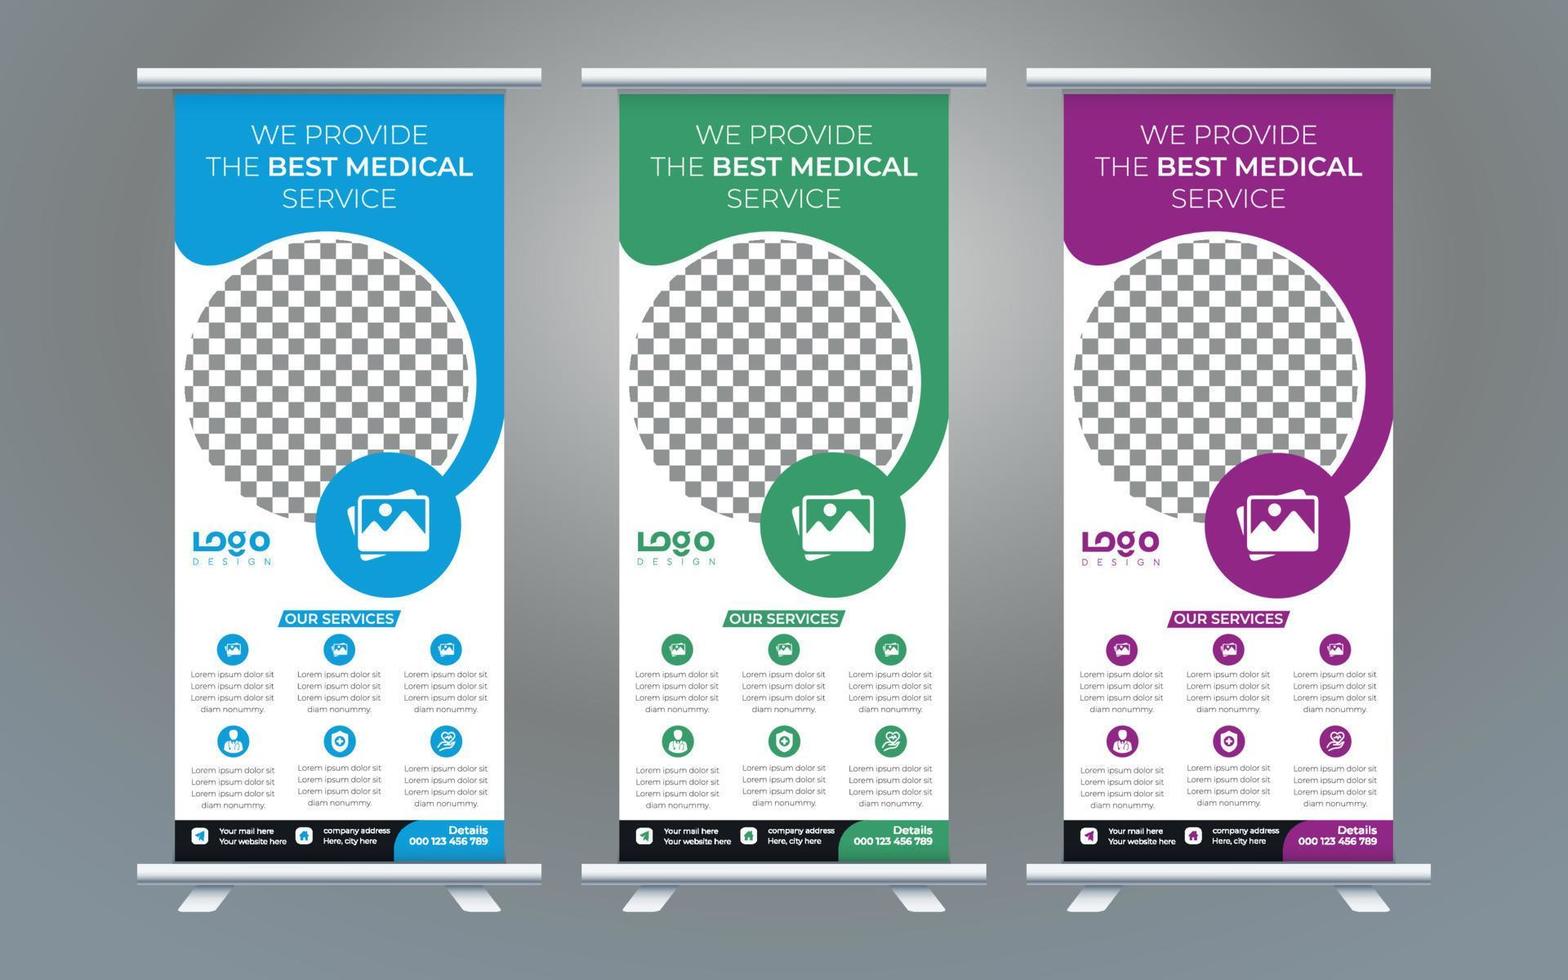 Roll up banner stand template design, business brochure flyer, infographics, presentation, advertisement, marketing, ads, poster, polygon background vector